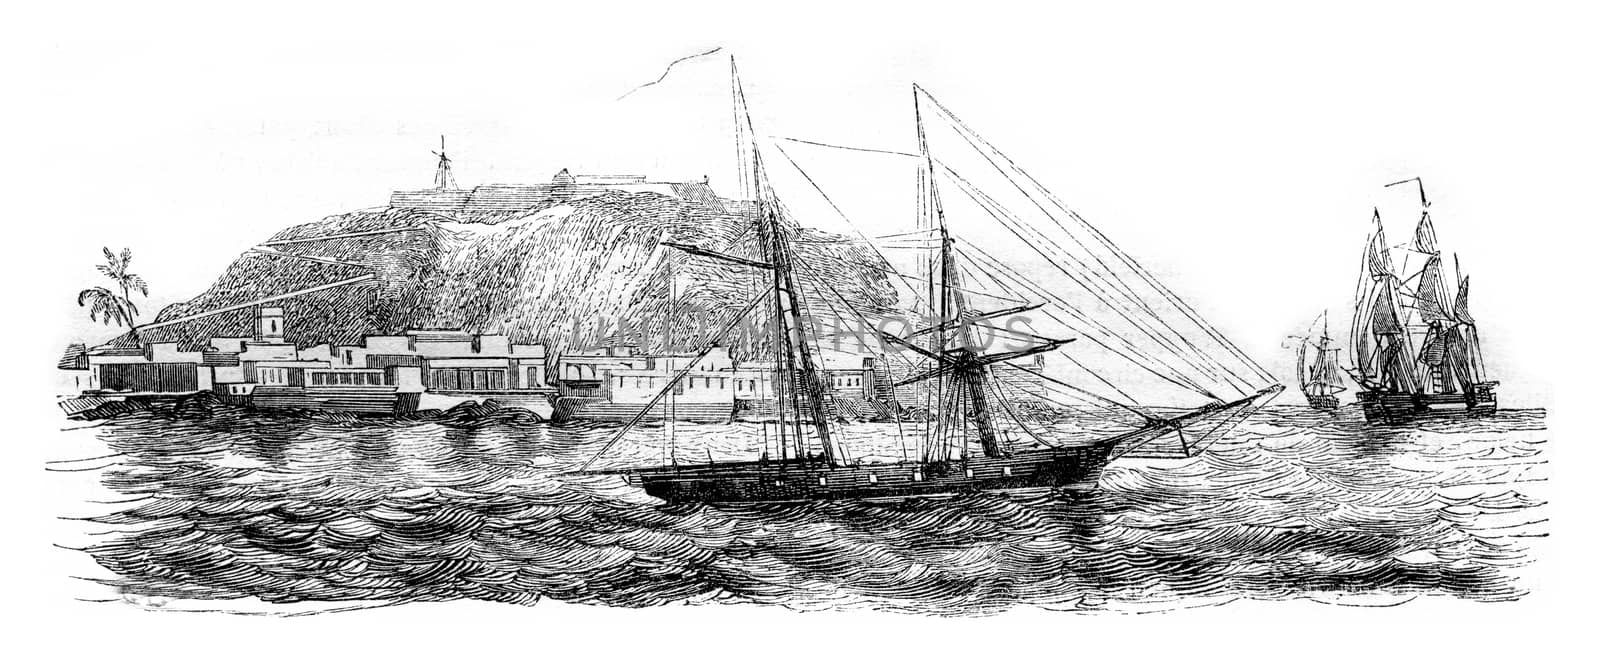 Gorce Island, East Point, vintage engraving. by Morphart